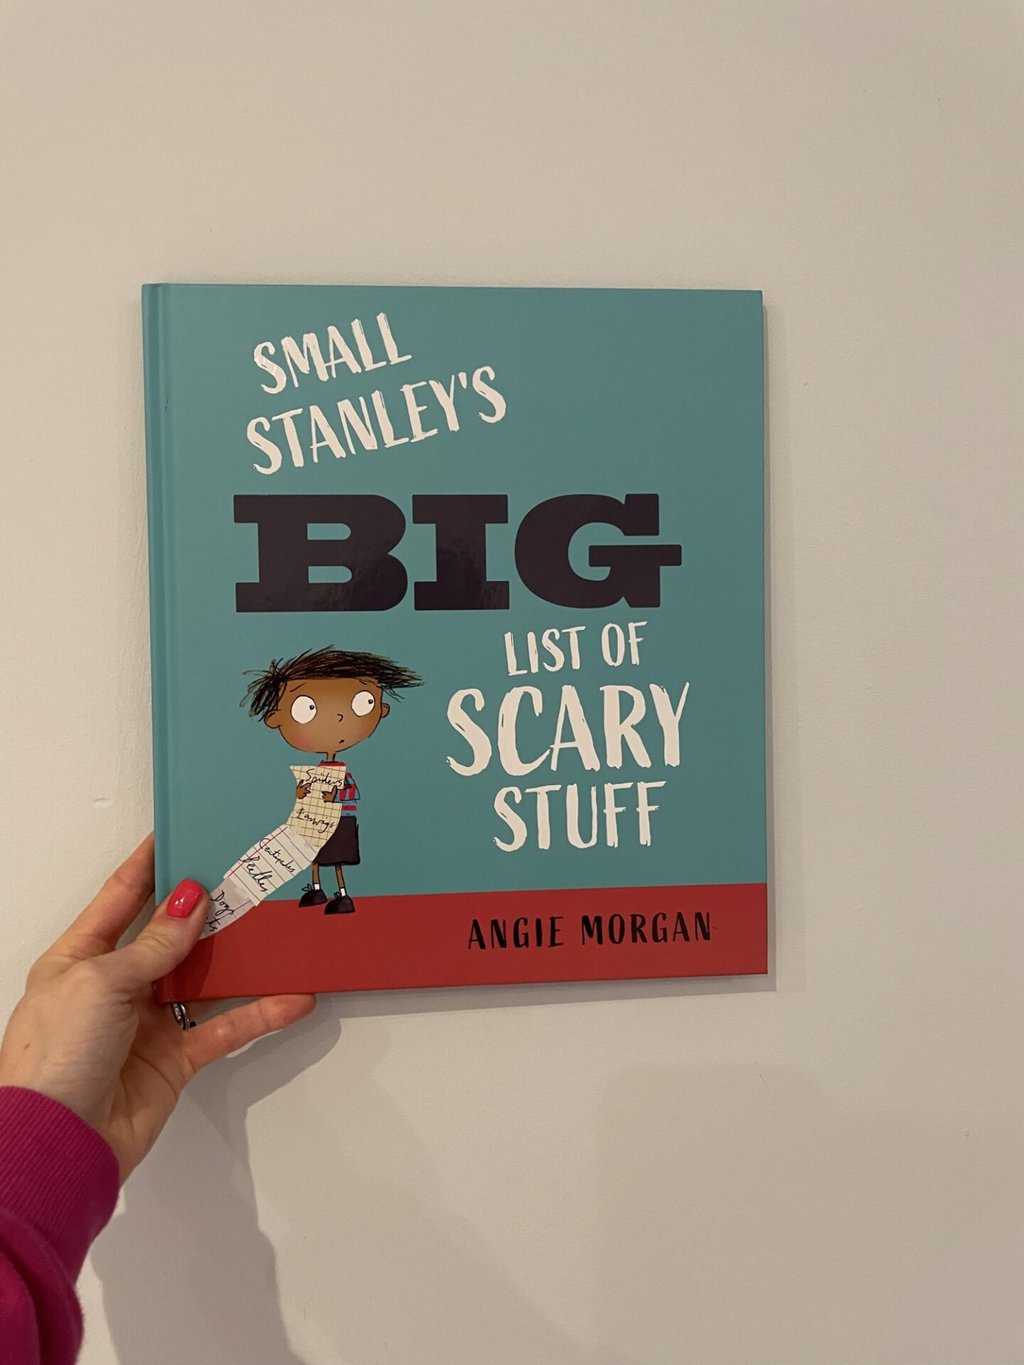 Small Stanley’s Big List of Scary Stuff –